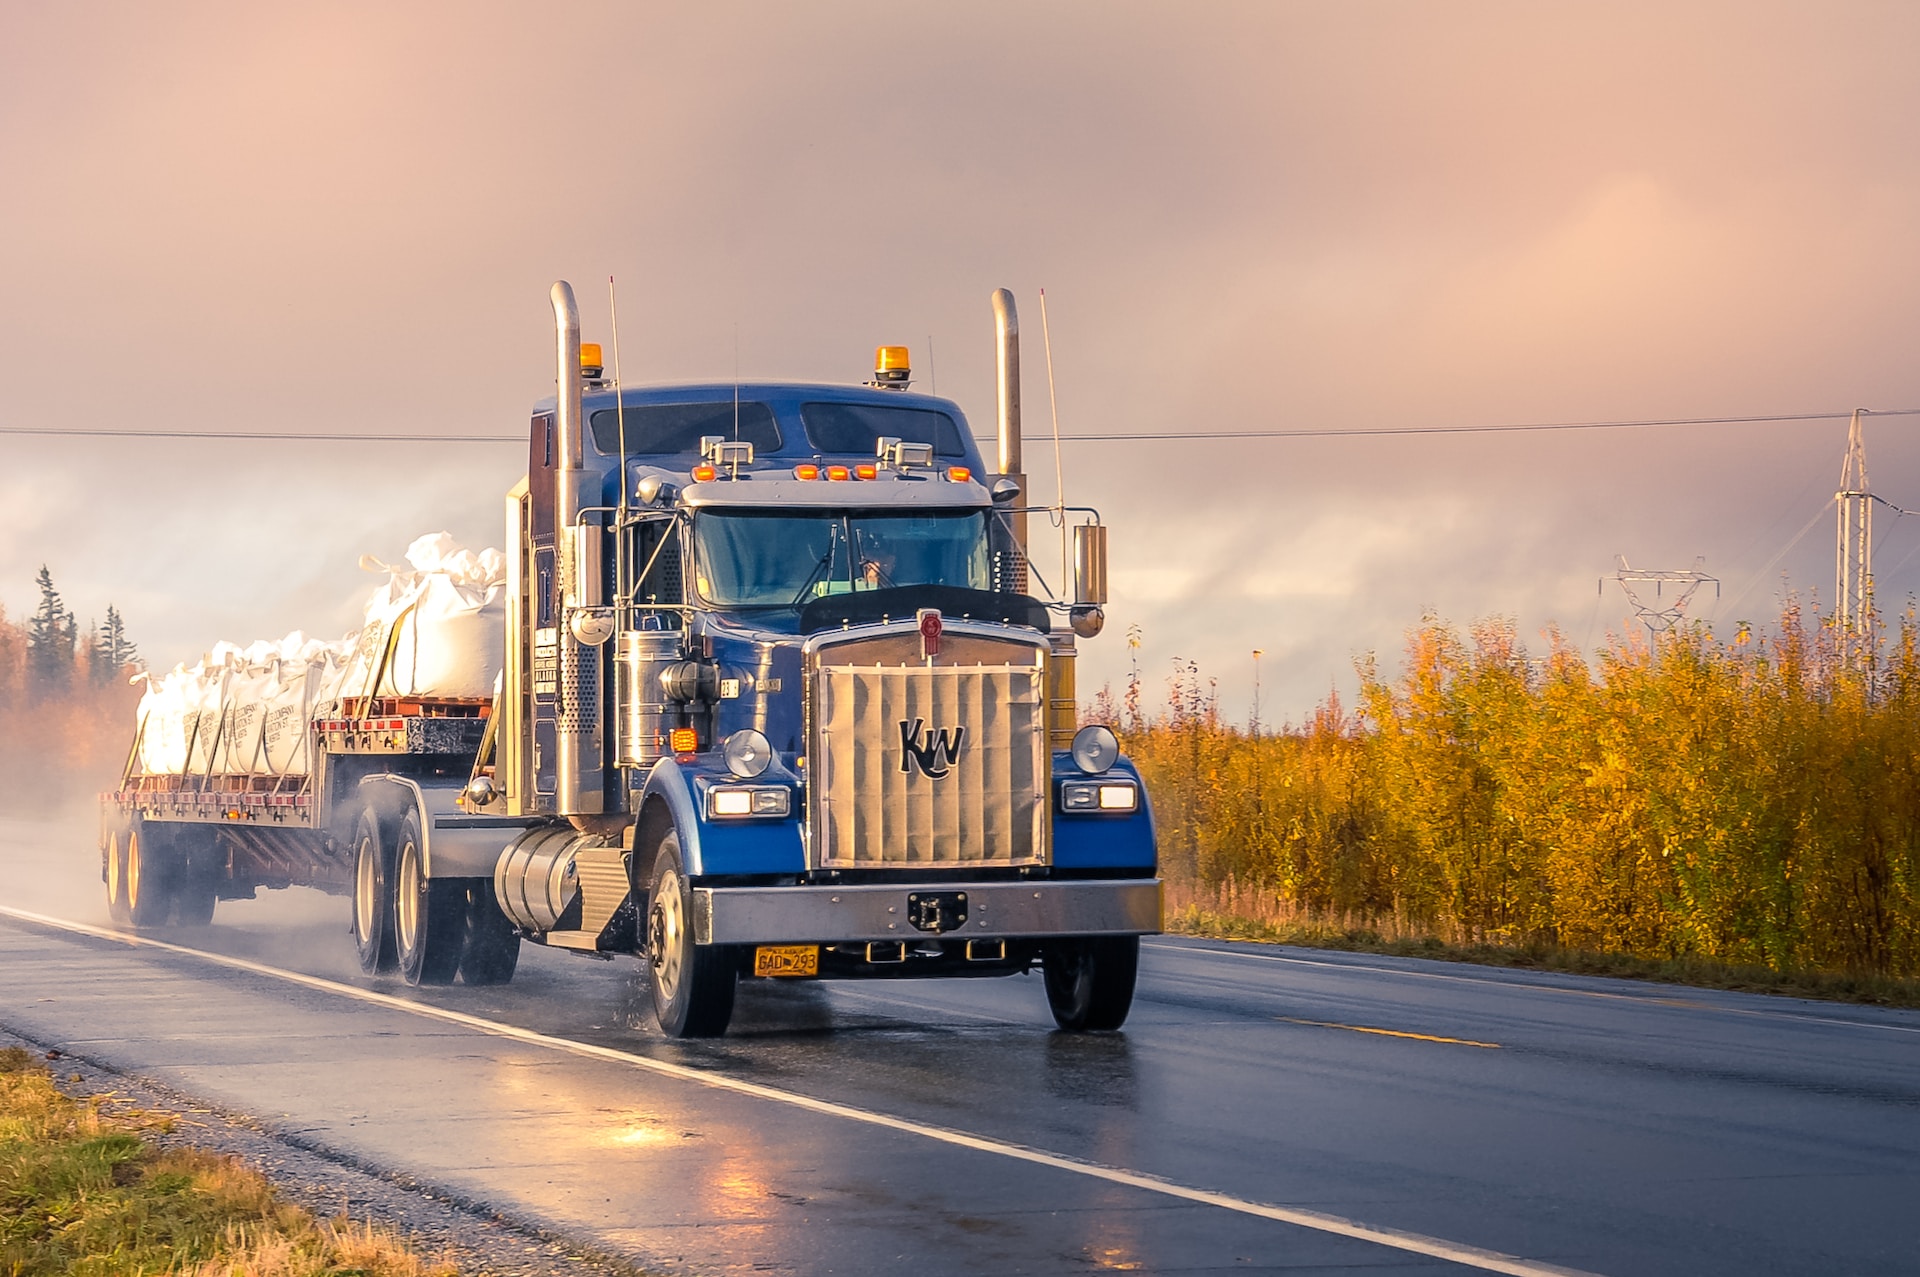 What You Need to Know About Holding a Commercial Driver’s License